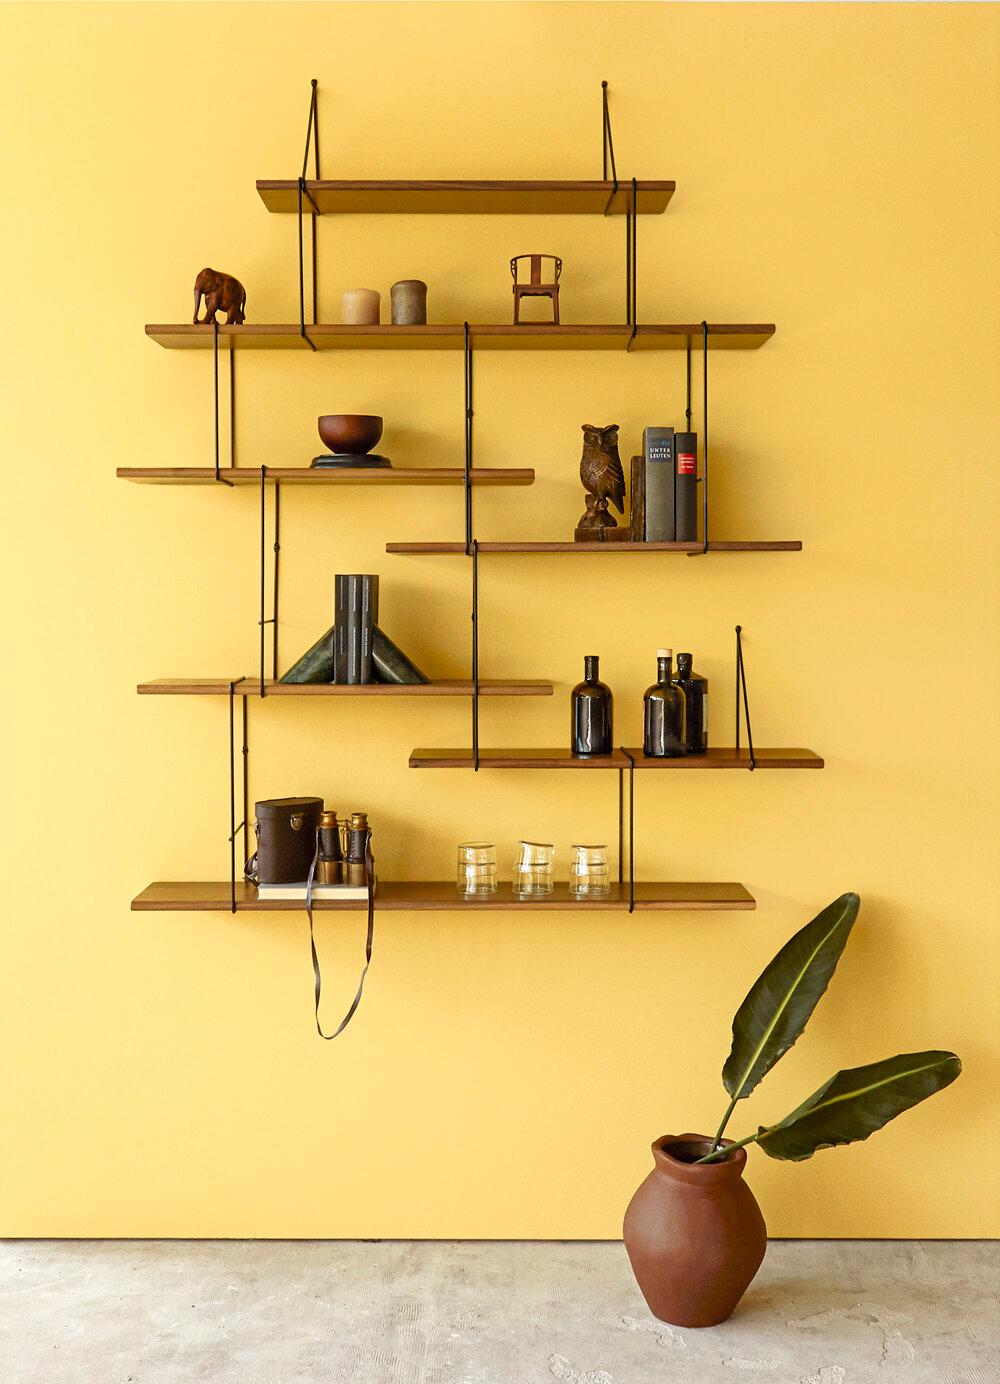 The LINK shelf is display and storage stripped down to the essentials. Its steel and wood construction forms an engaging interplay with many potential compositions: asymmetrical, highreaching, or laid out lengthwise. It is designed to work perfectly